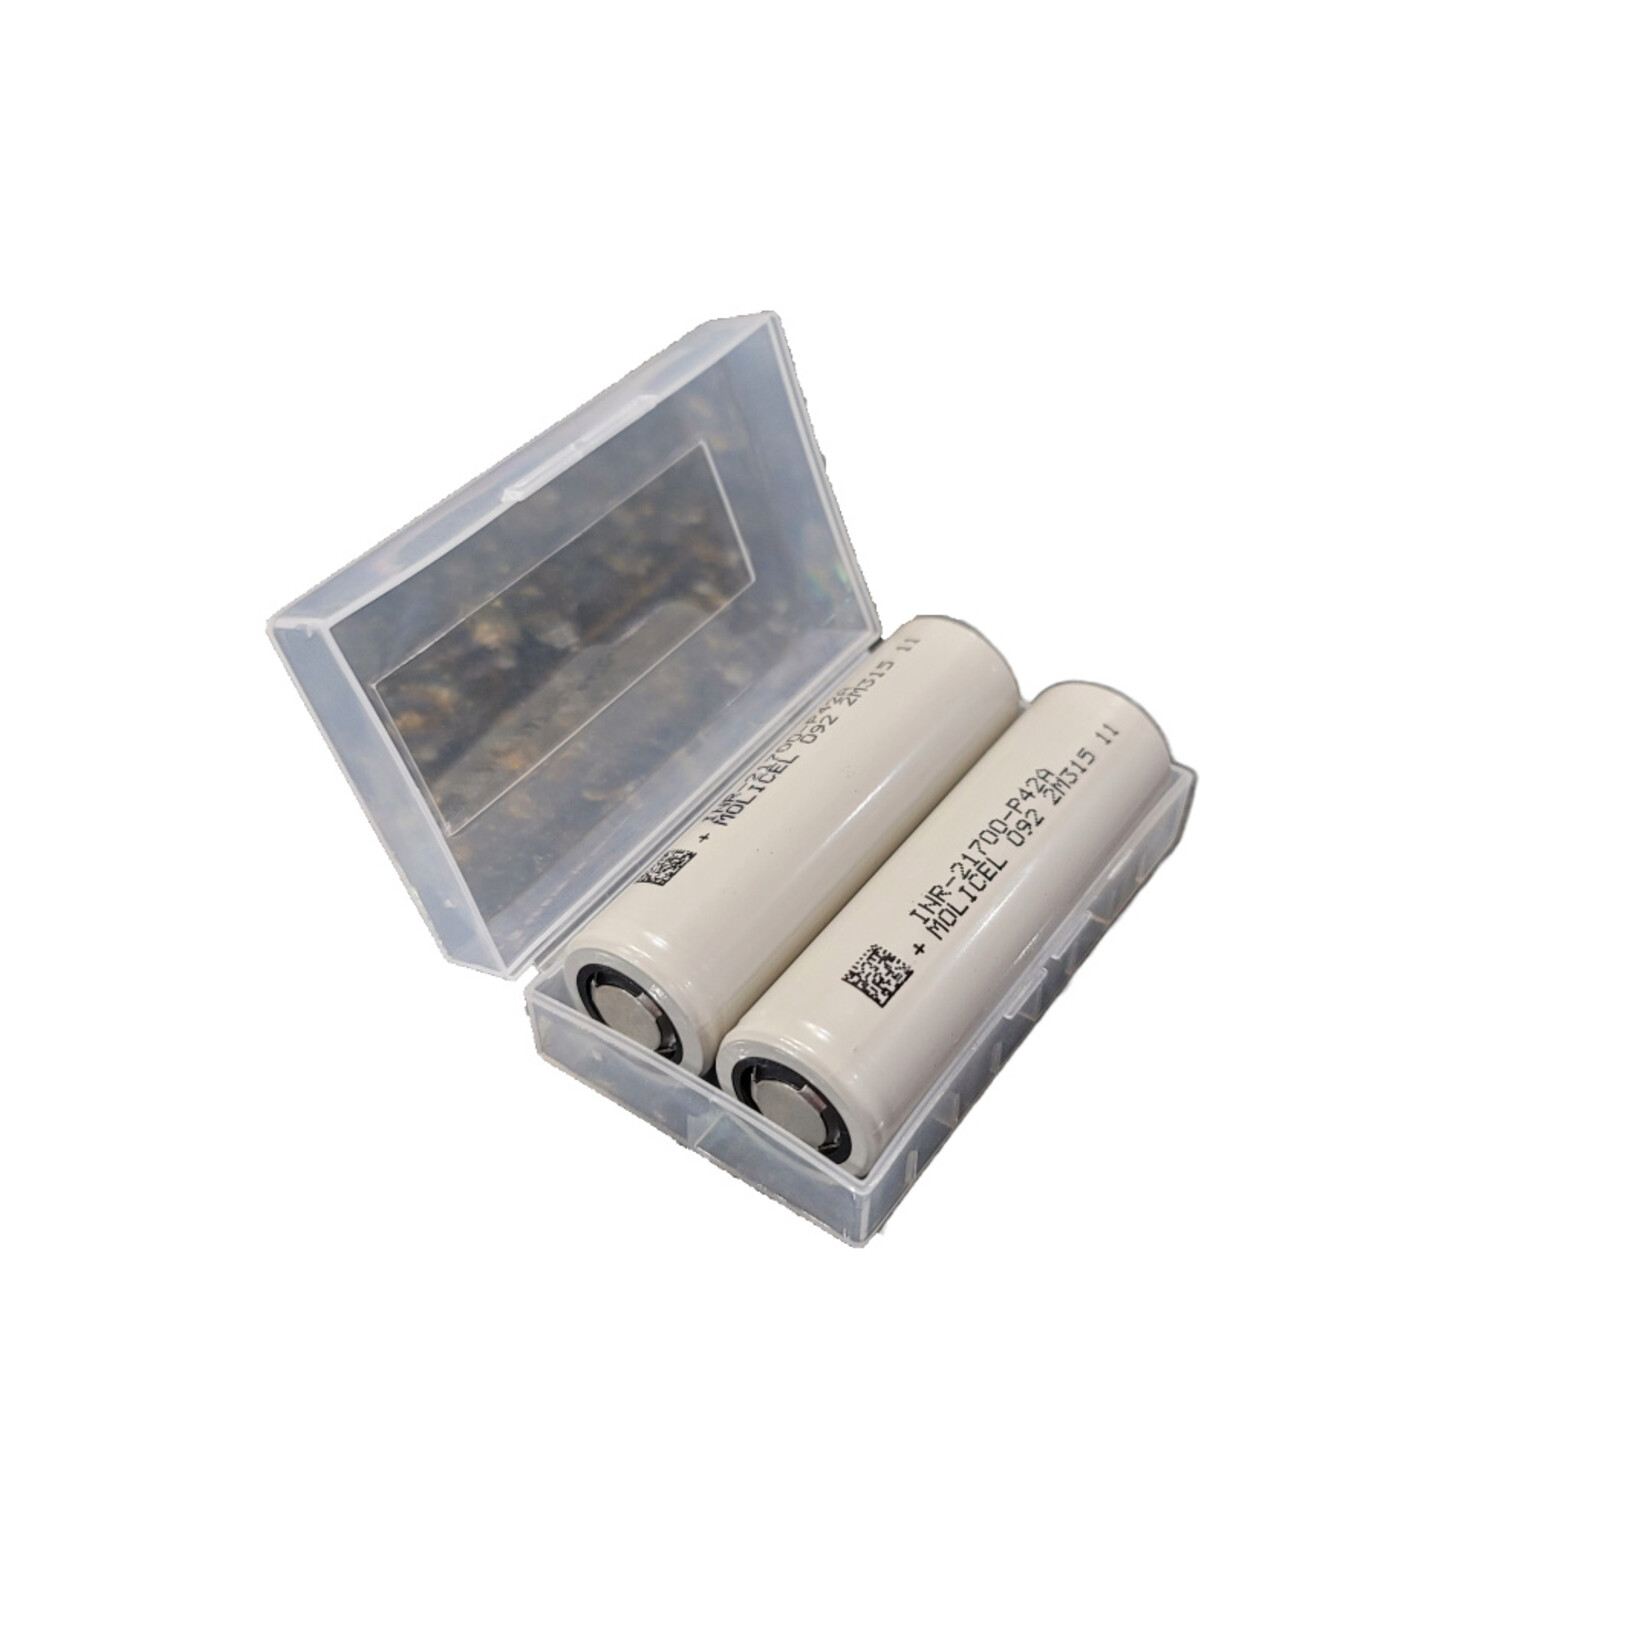 Molicel Box of 2 21700 P42A